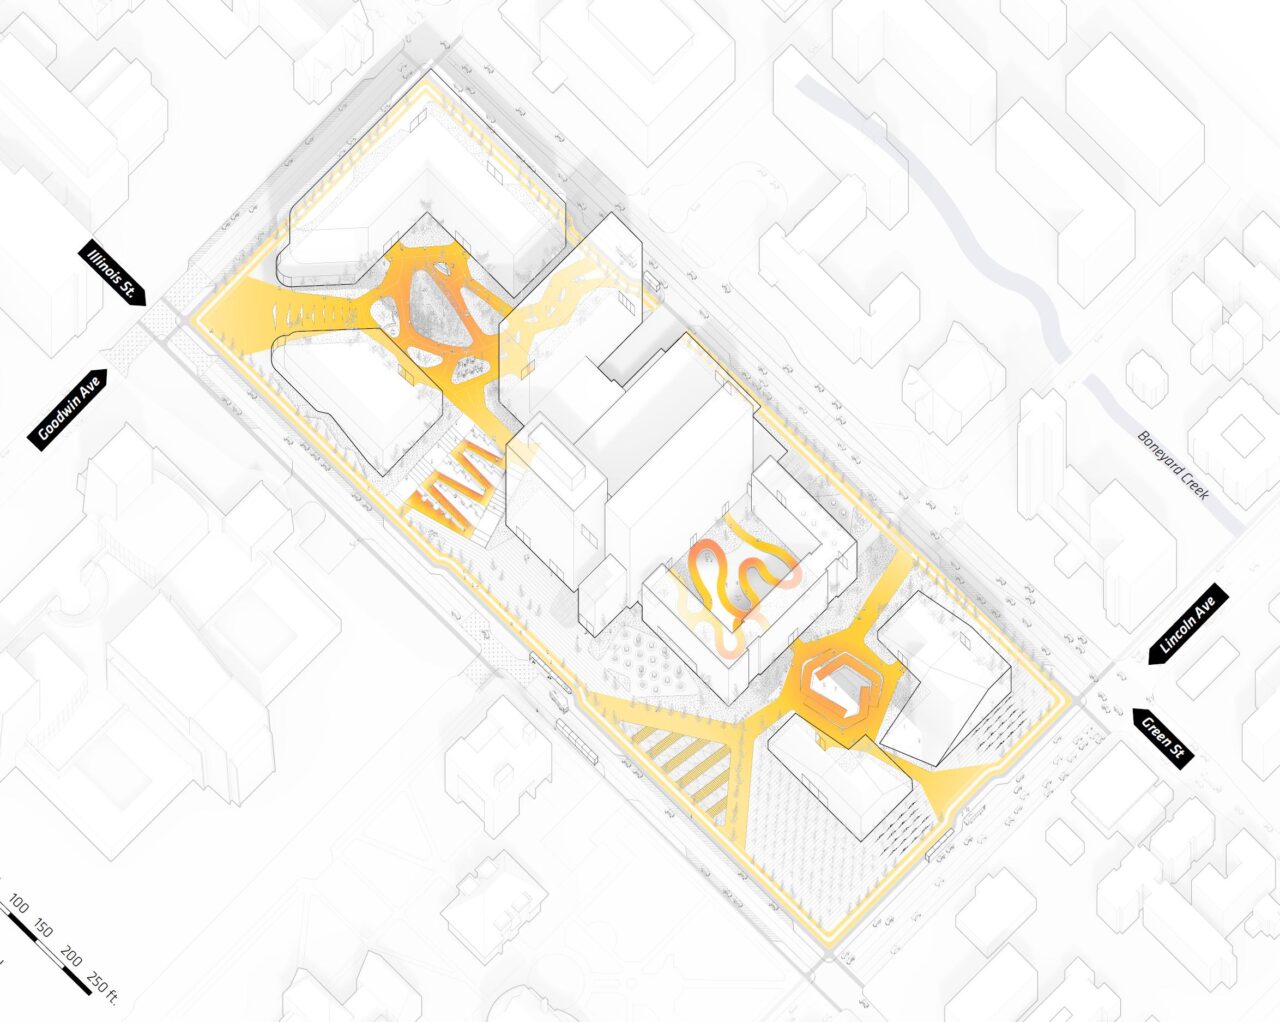 Oblique site drawings with orange and yellow highlights 